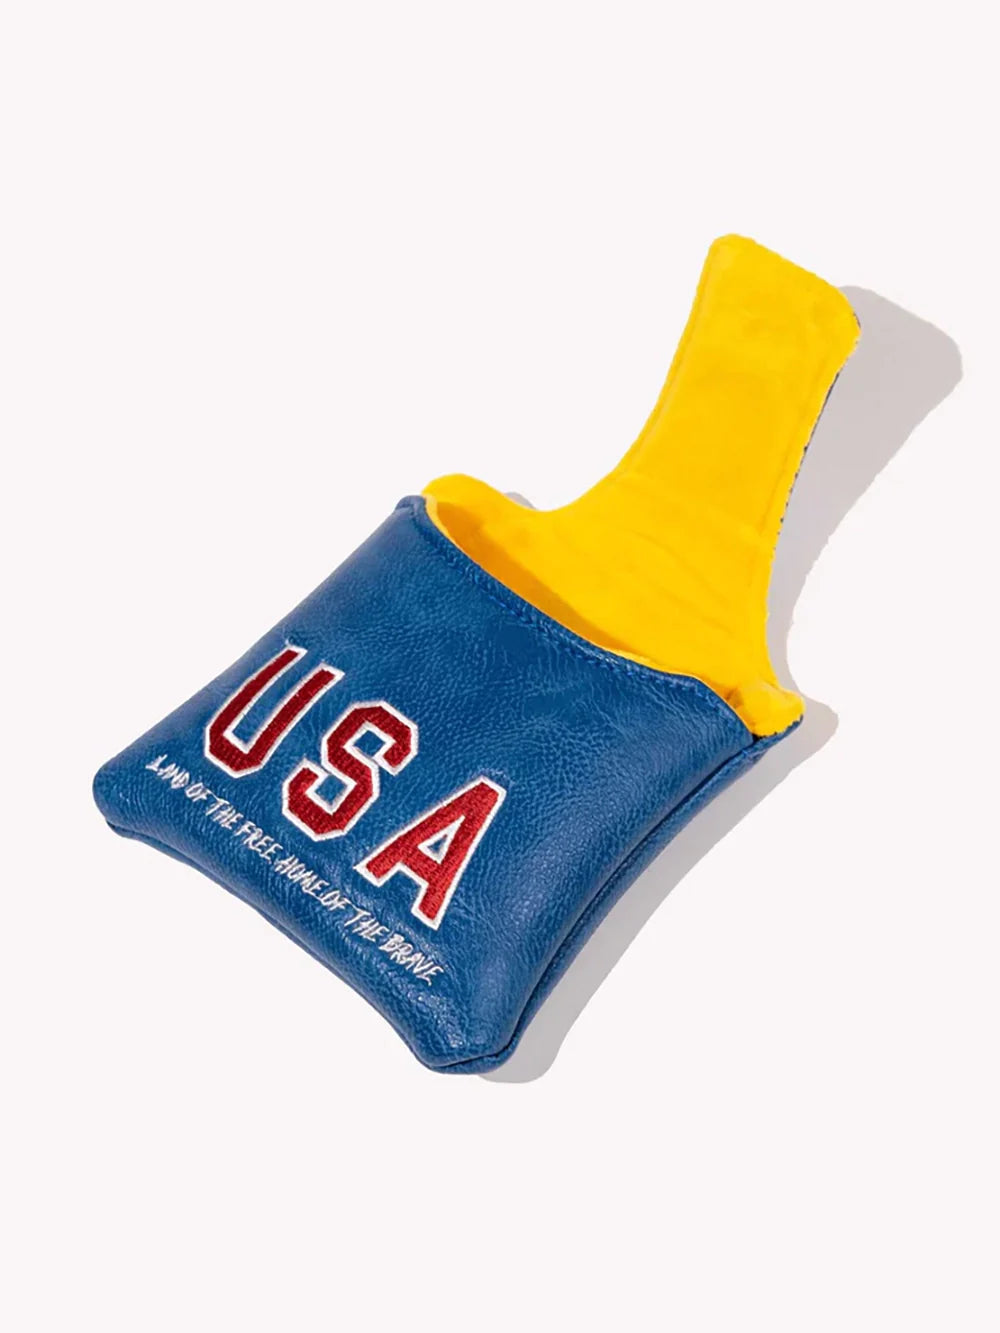 Mallet Putter Cover 763334817-USA